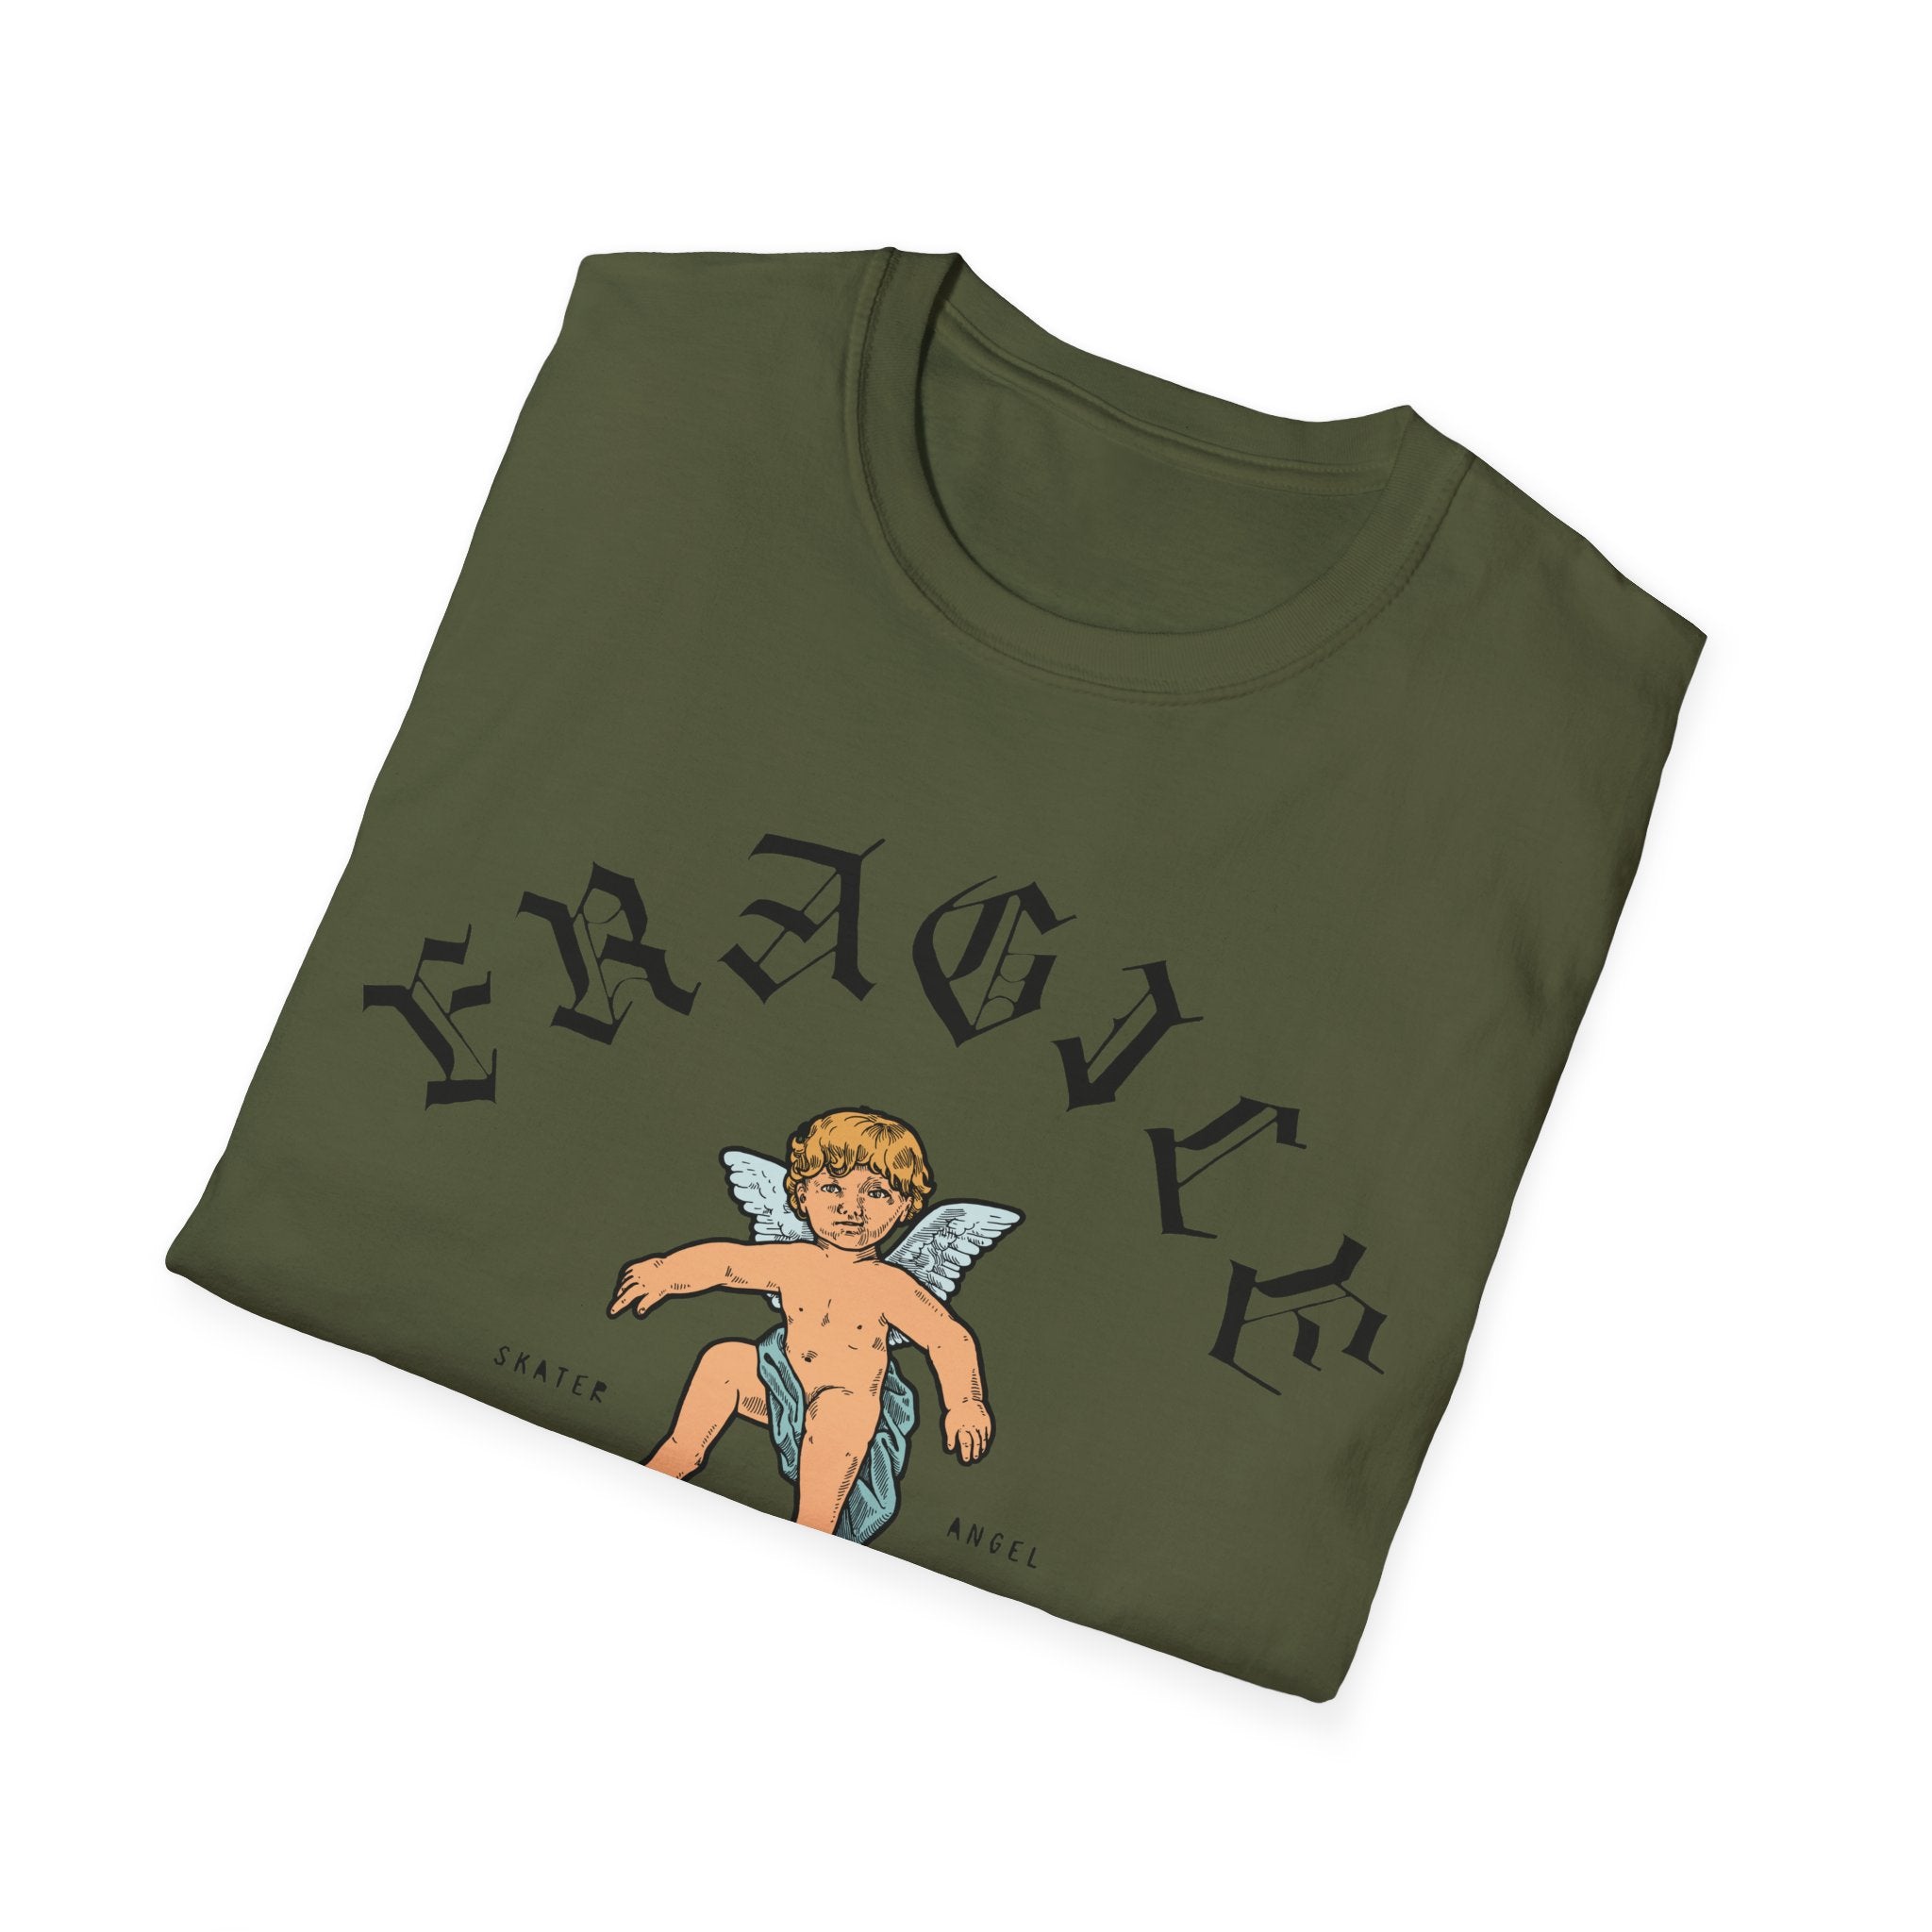 A soft, green Skater Angel t-shirt with an image of a boy holding a teddy bear.